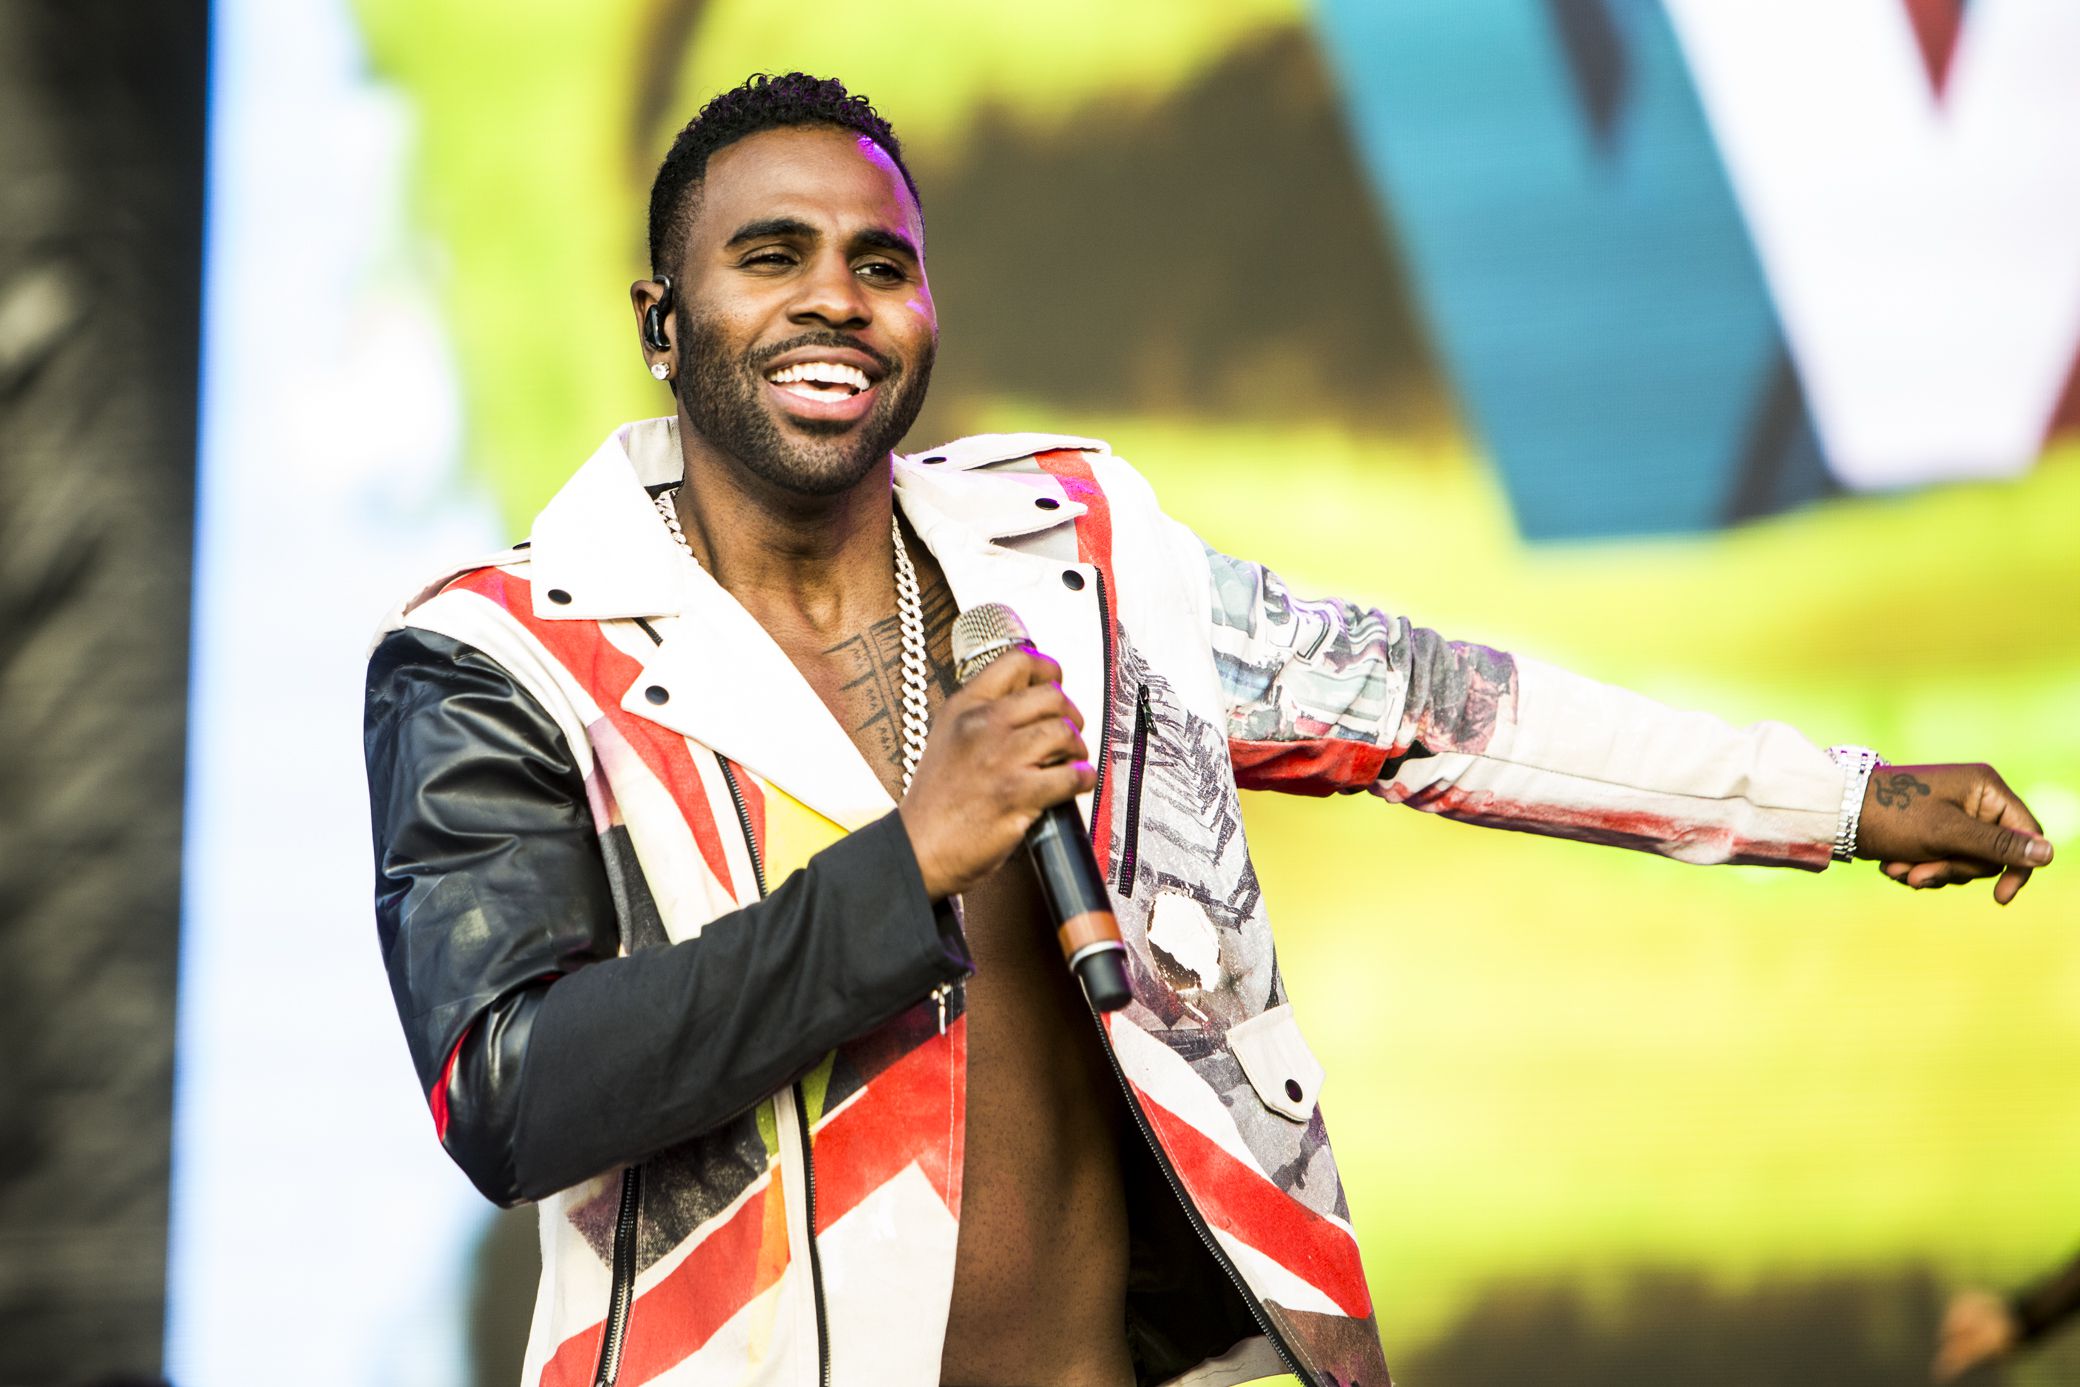 jason derulo 2 KAABOO Del Mar Succeeds at Being a Festival for Everyone